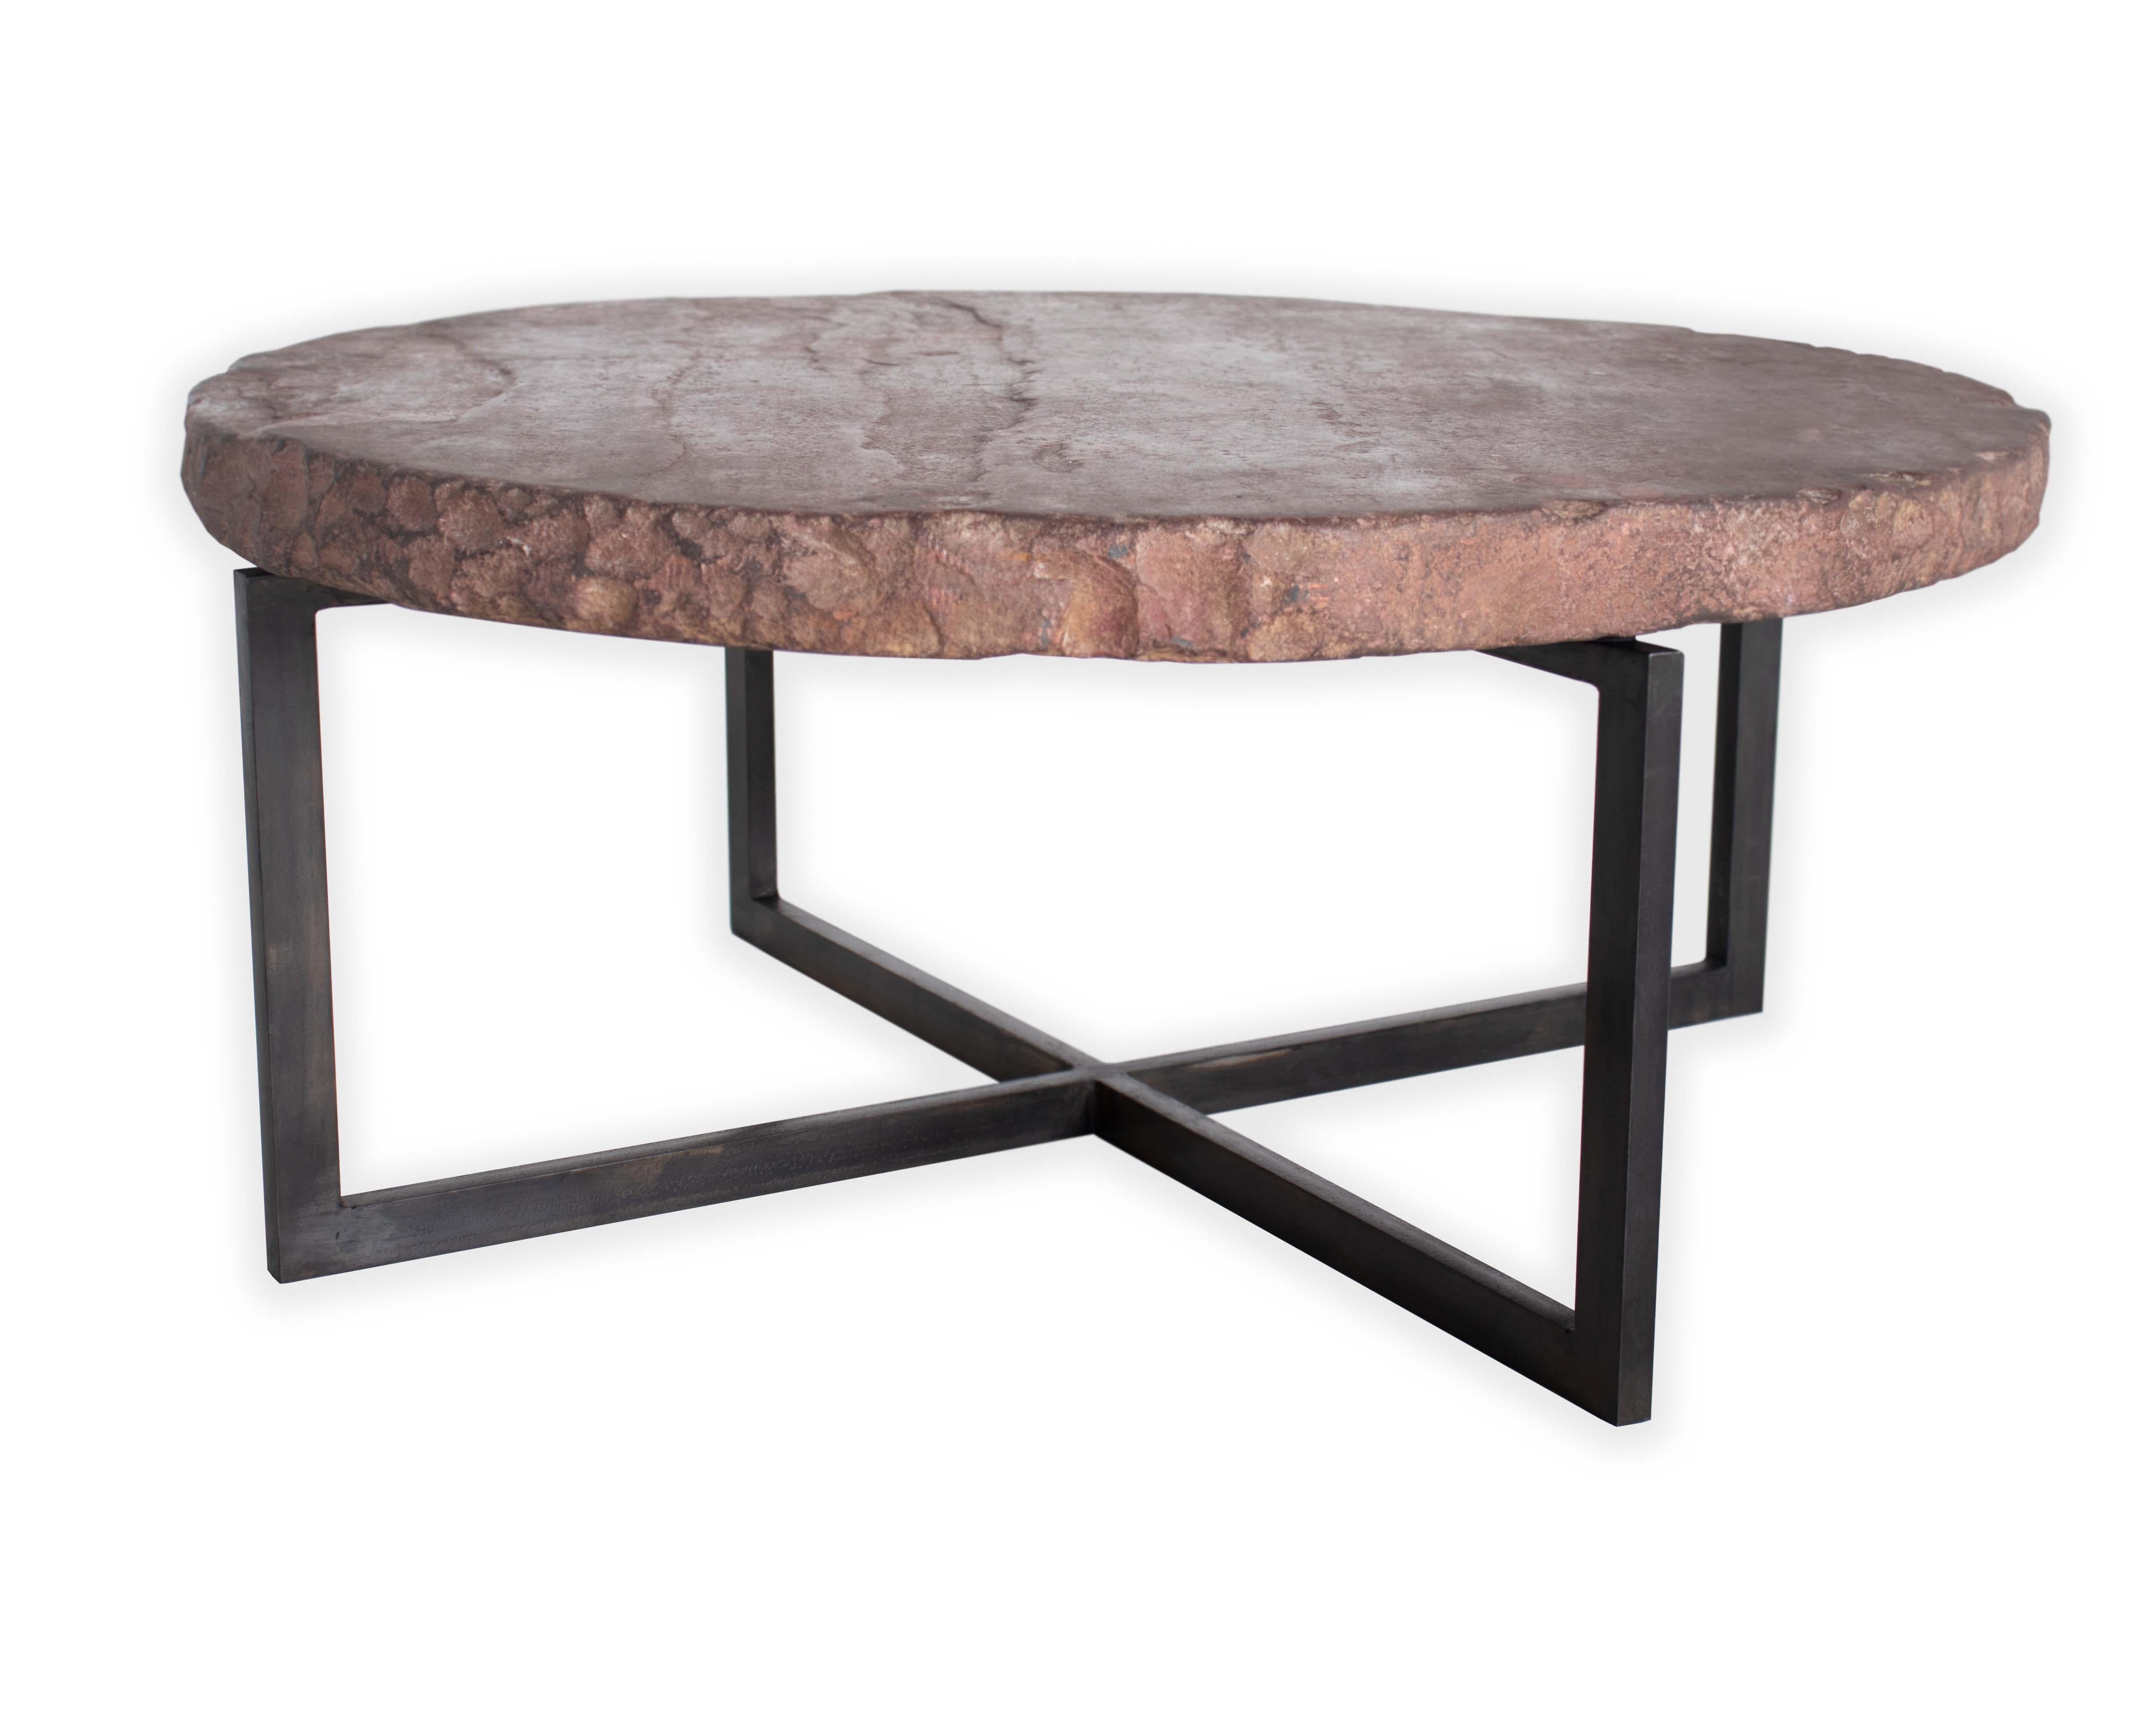 Rustic Architectural Stone on Steel Coffee Table